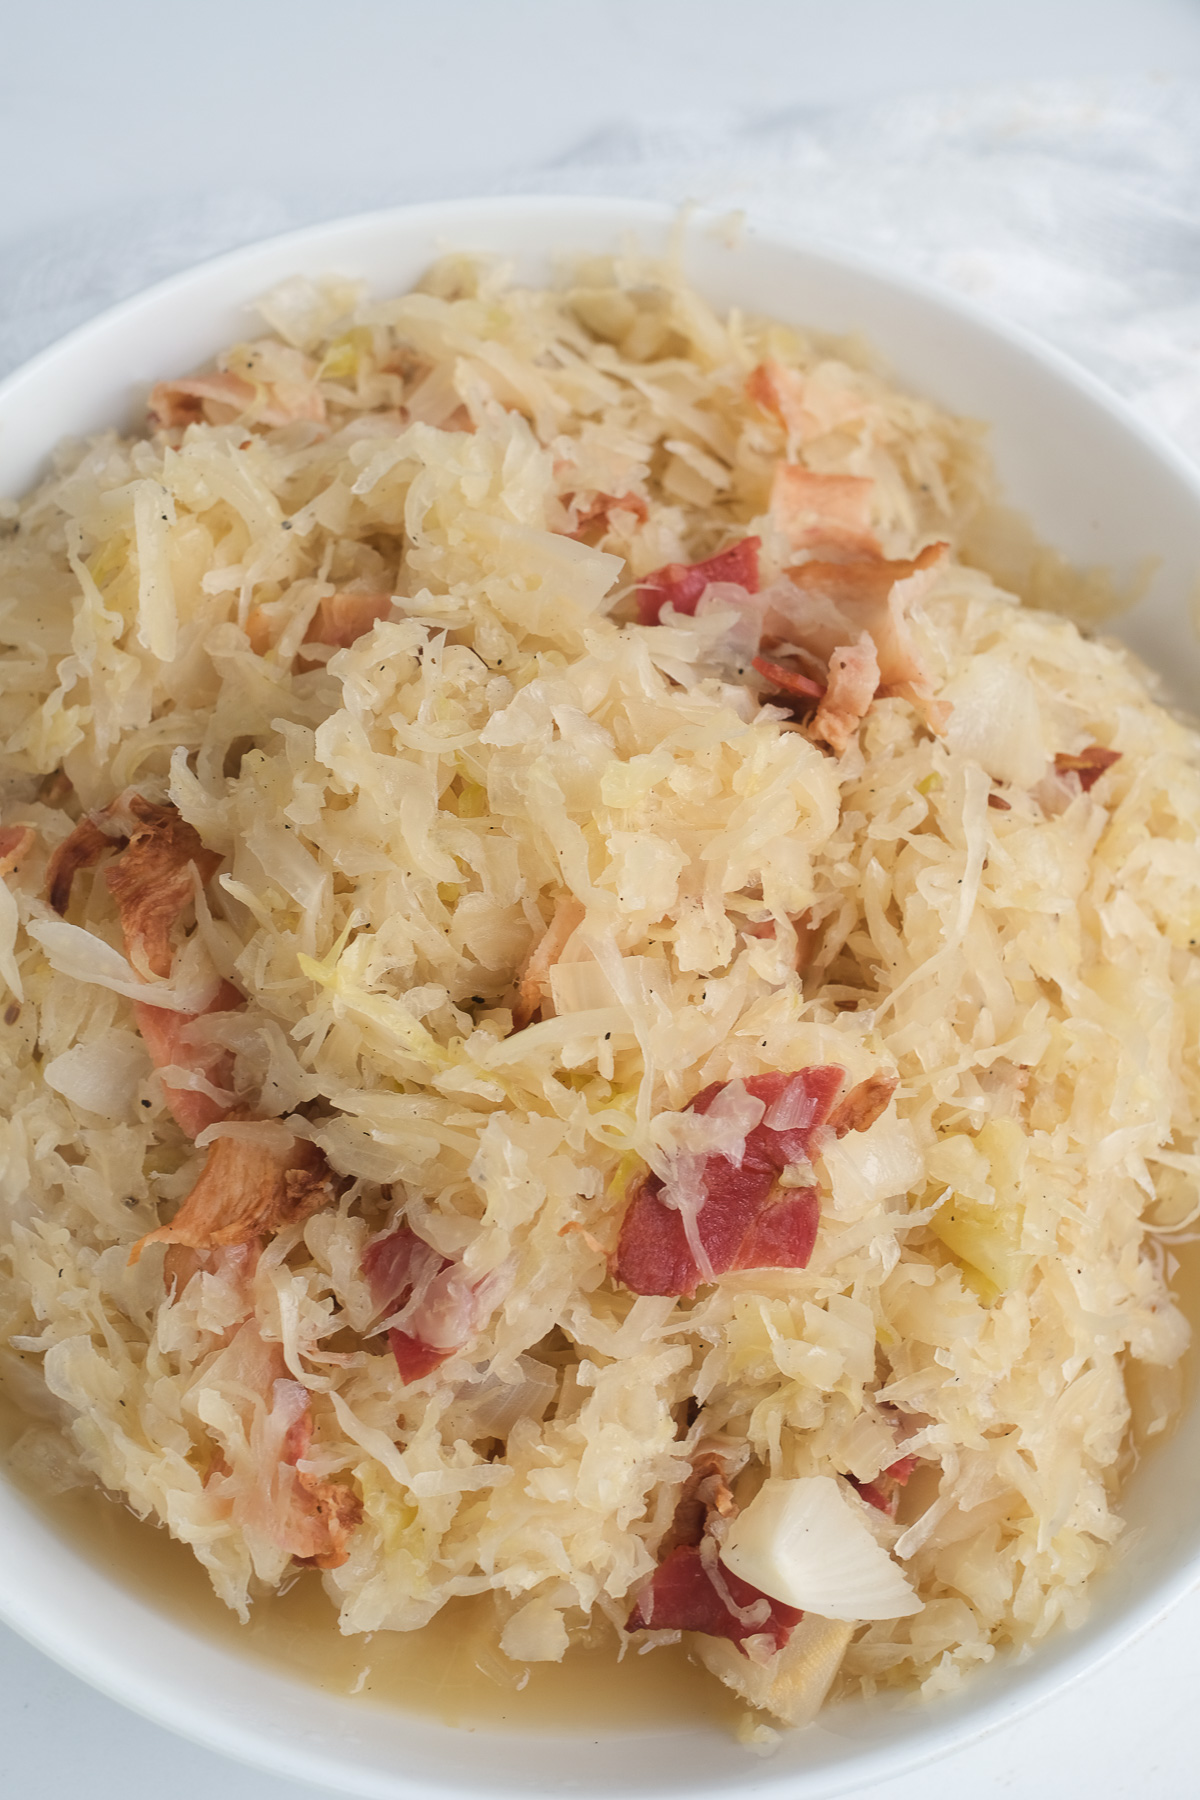 How To Cook Canned Sauerkraut